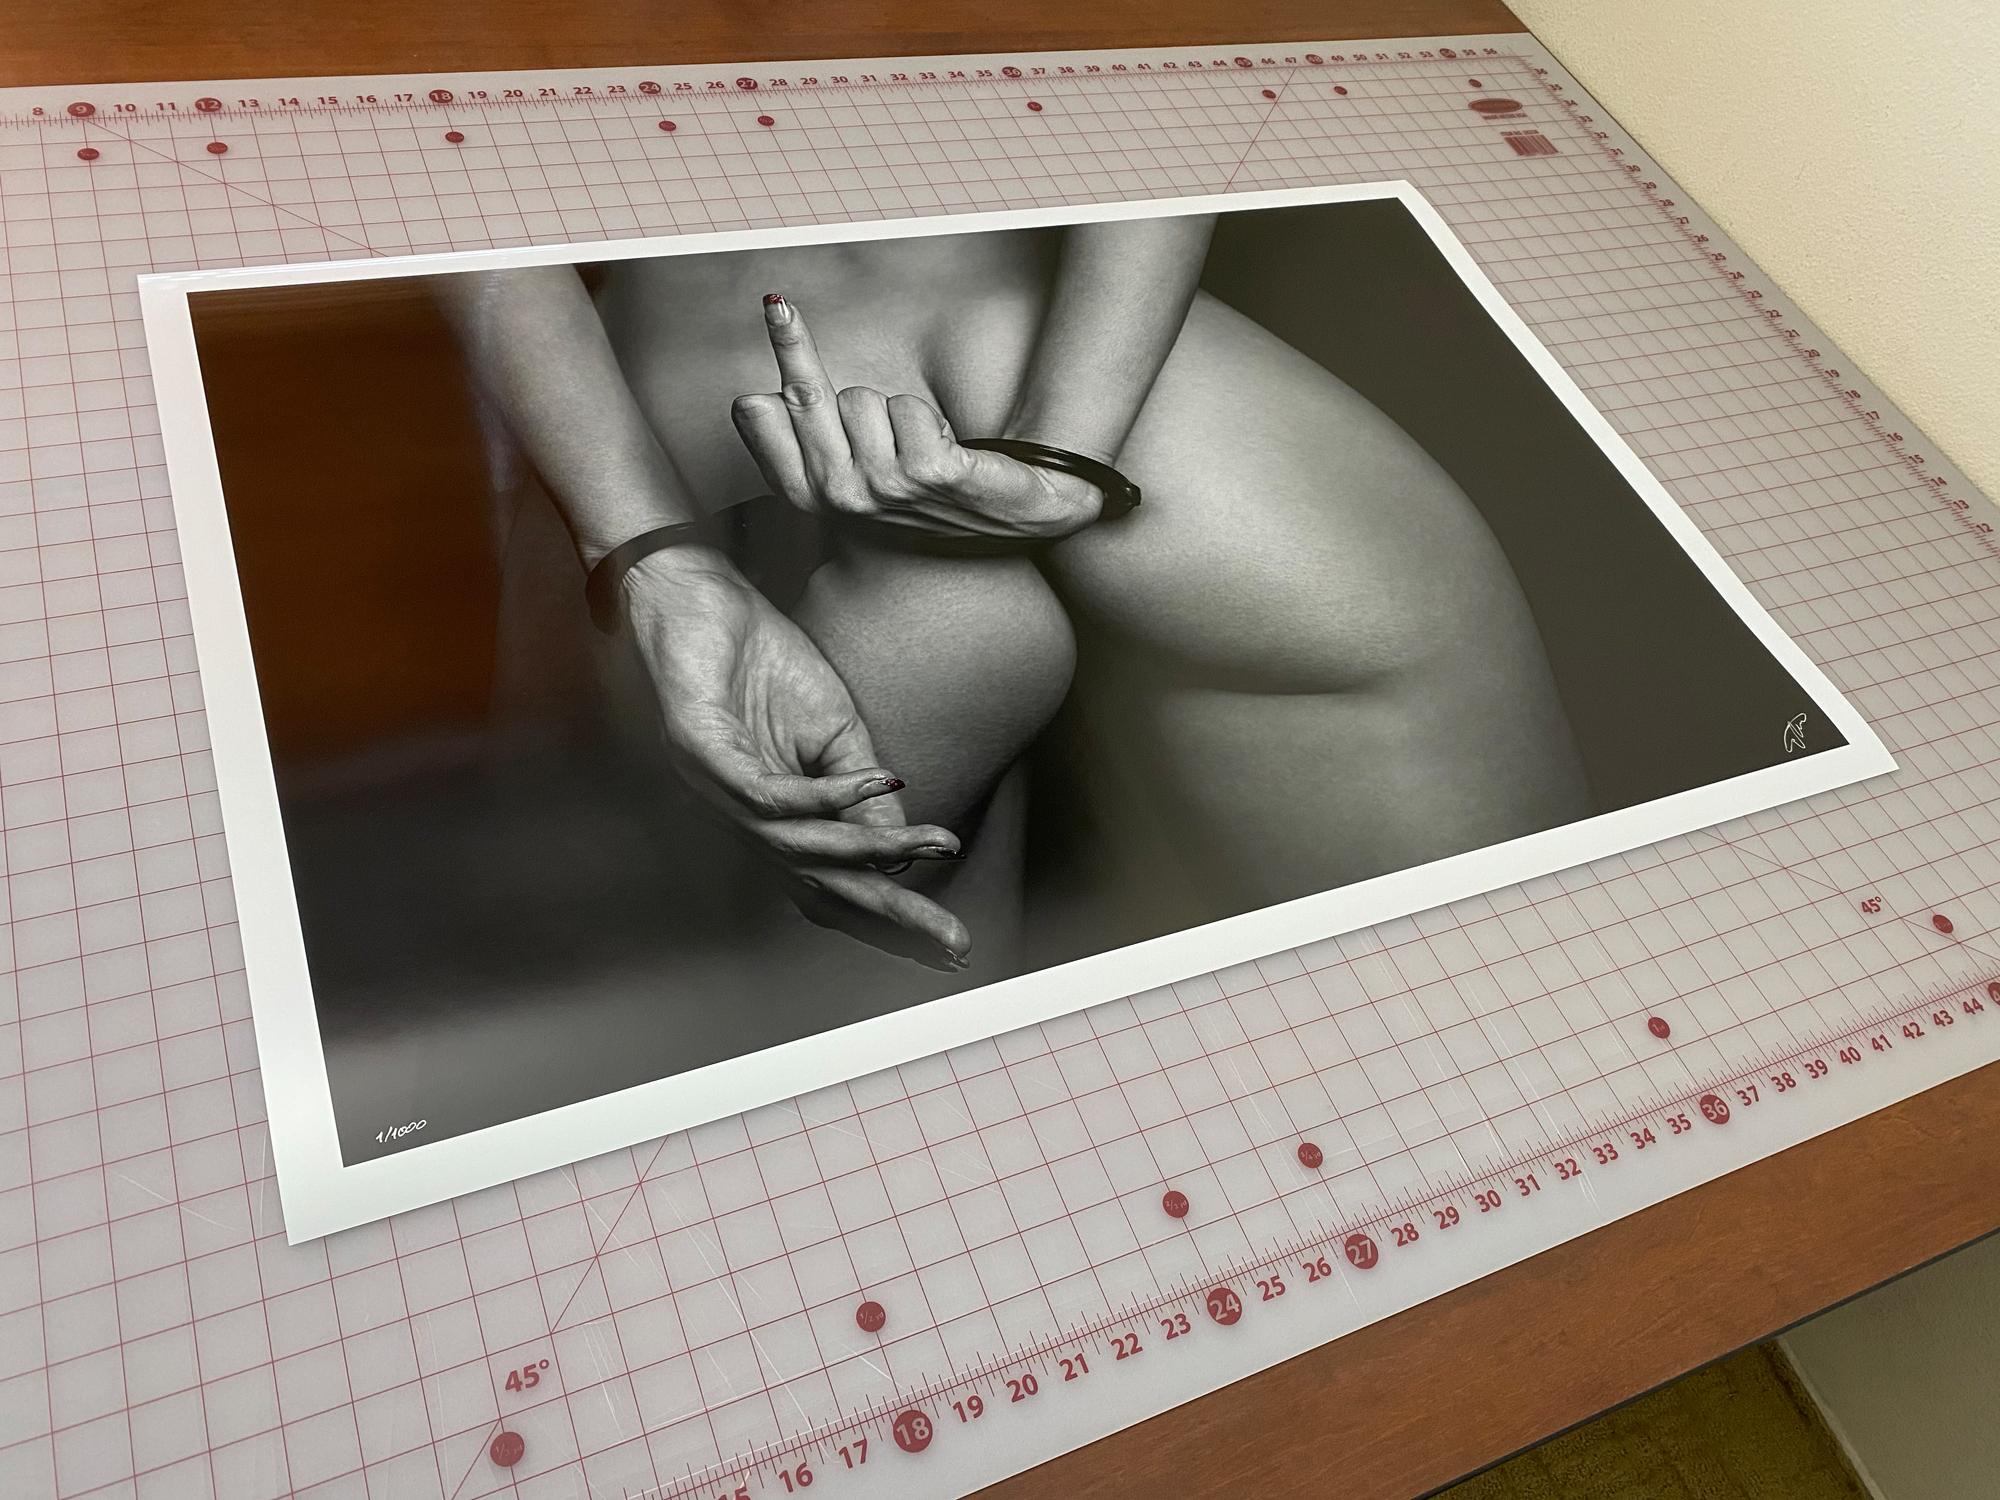 A black and white photograph of a perfect woman's buttocks and her handcuffed hands giving a finger.

Original gallery quality archival pigment print signed by the artist. 
Limited edition of 1000. Print #3.
Paper size: 23x36